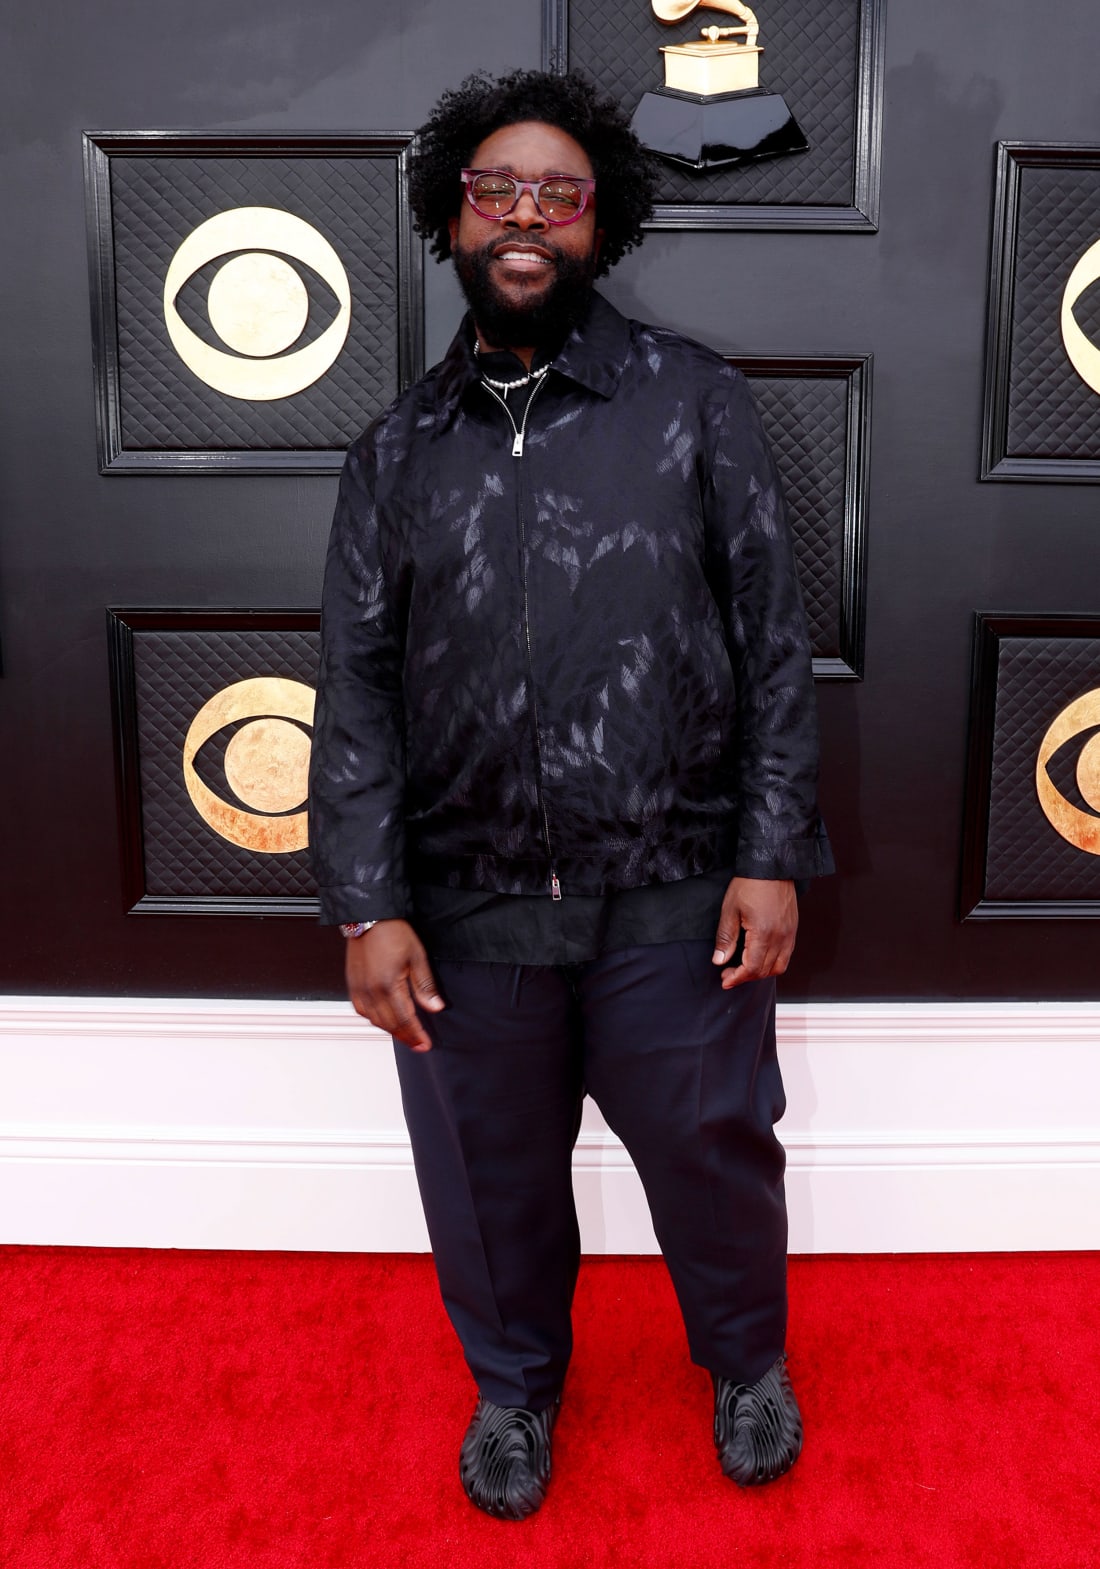 Questlove kept things casual in a dark patterned jacket and a pair of Crocs. 